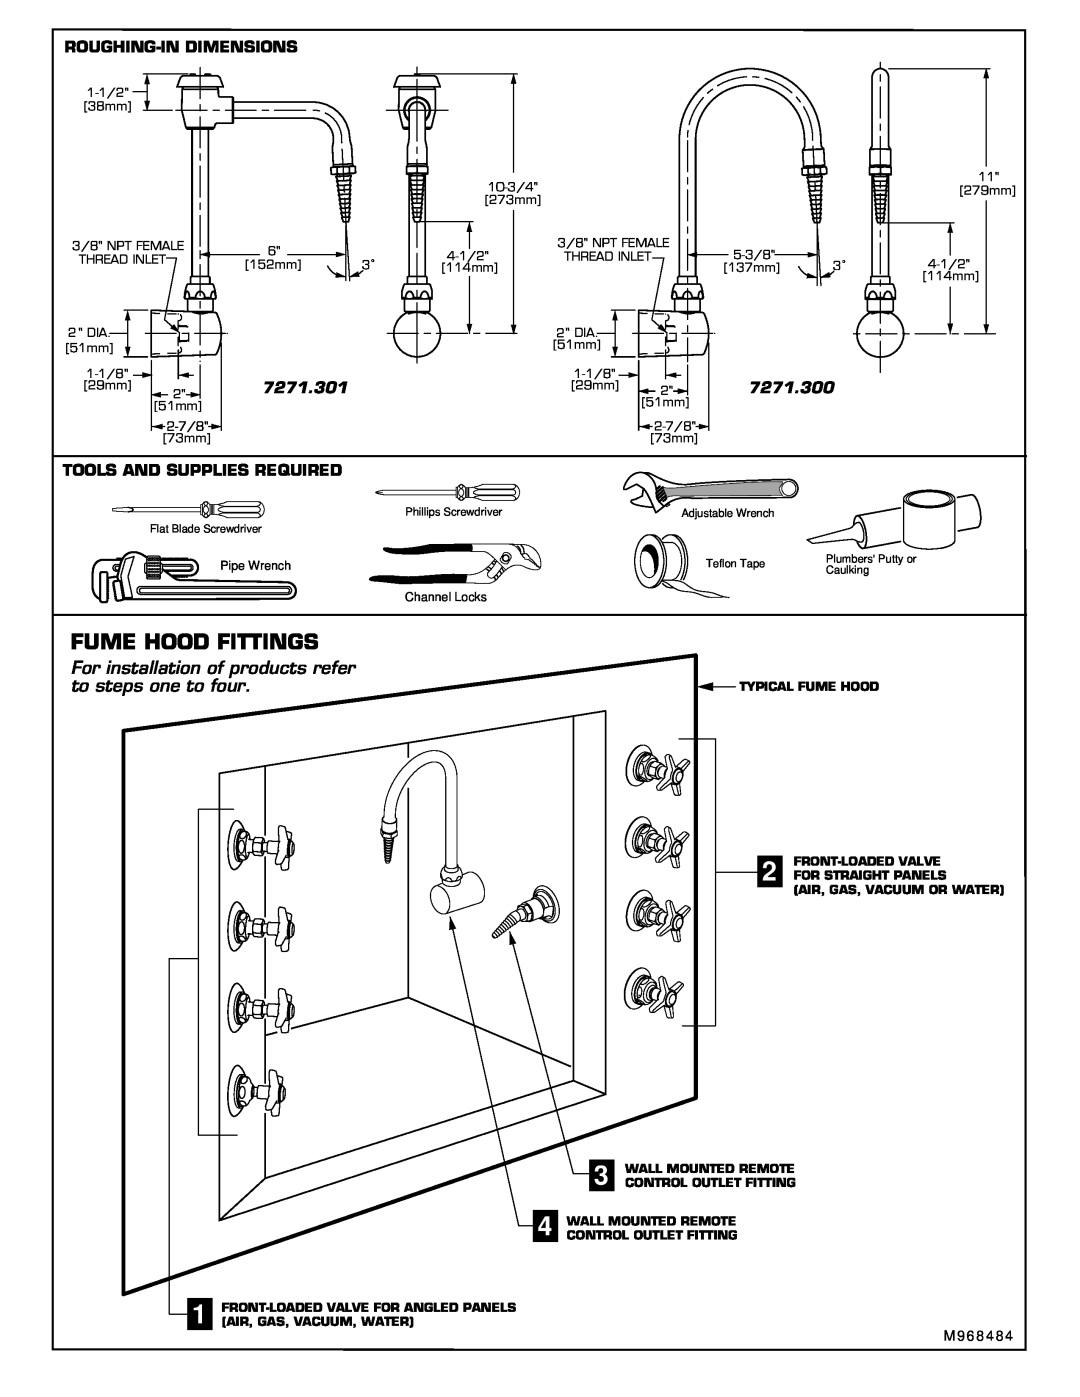 American Standard 7271.301, 7271.521 7271.300, Tools And Supplies Required, M, Fume Hood Fittings, Roughing-Indimensions 